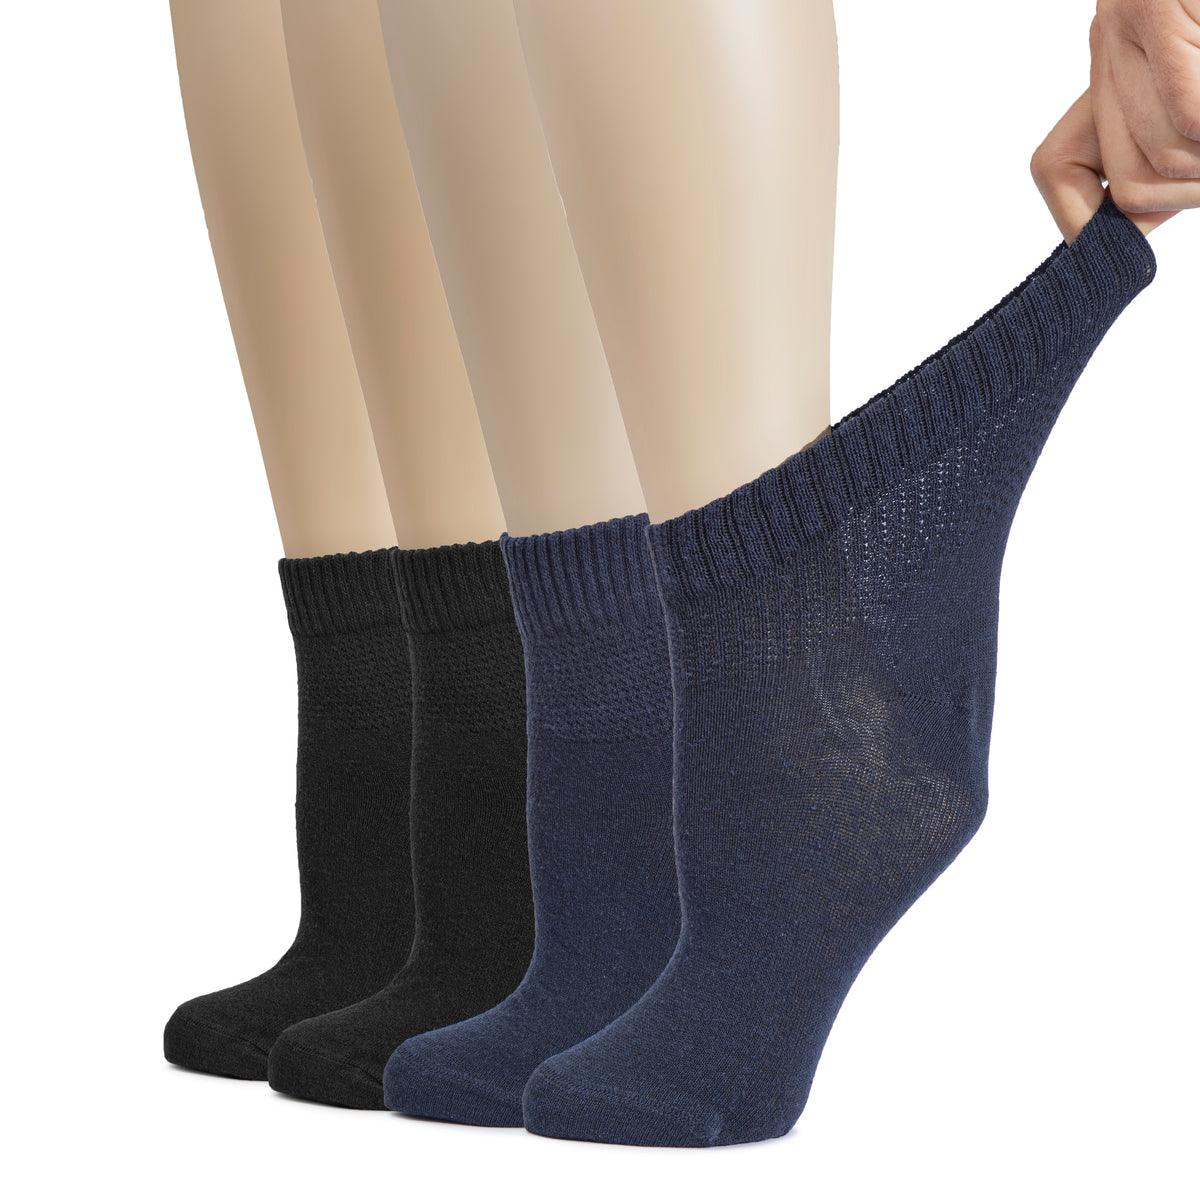 Two pairs of Women's Cotton Diabetic Ankle Socks, including one blue and one black pair.